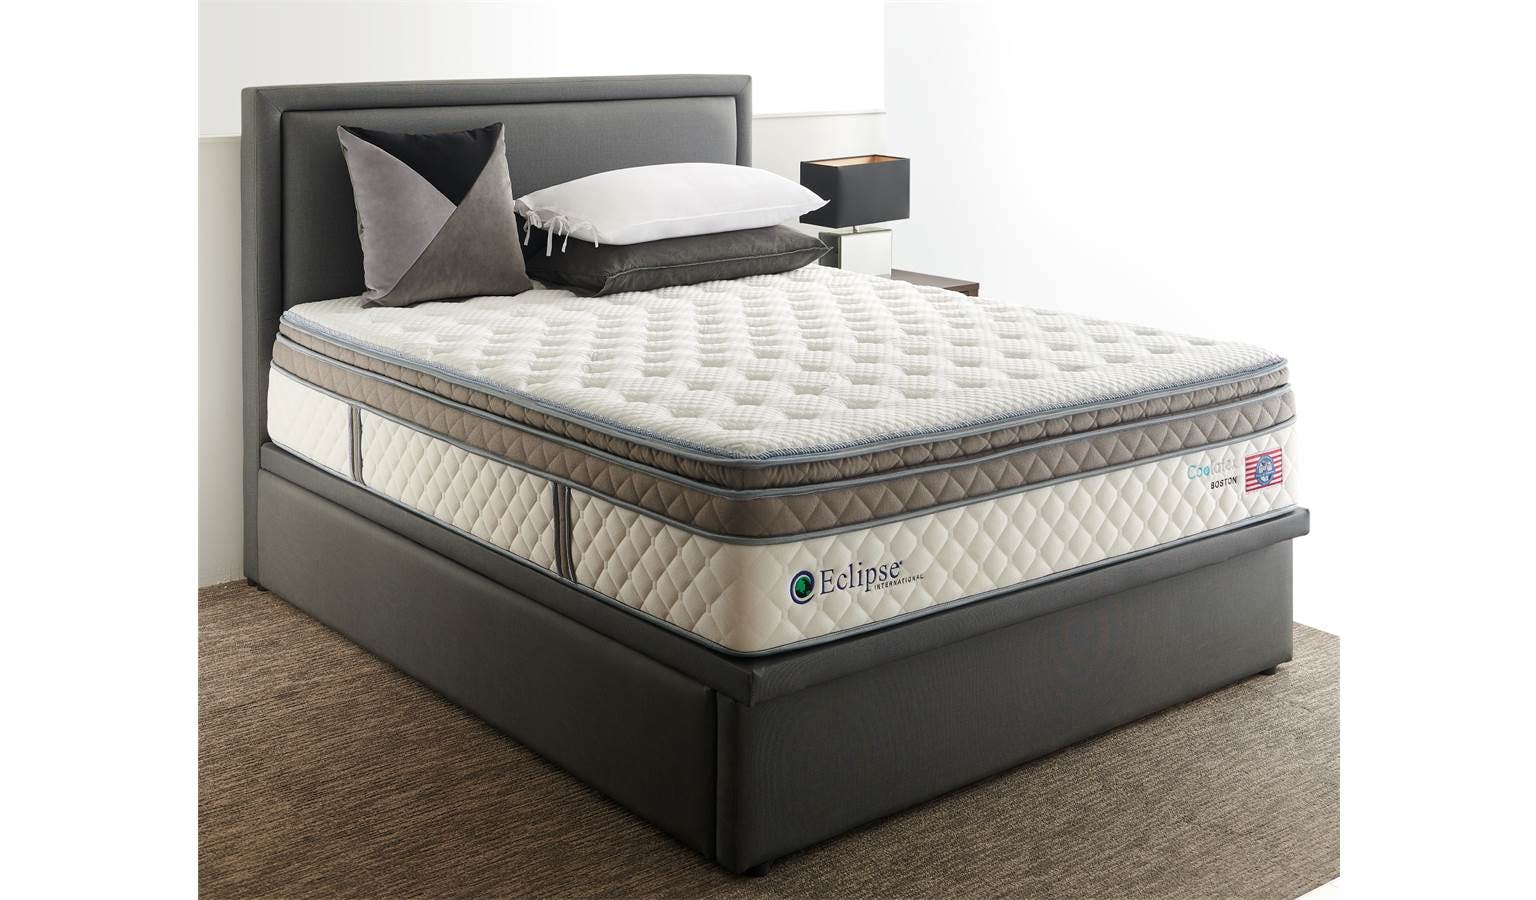 eclipse orthocare mattress review